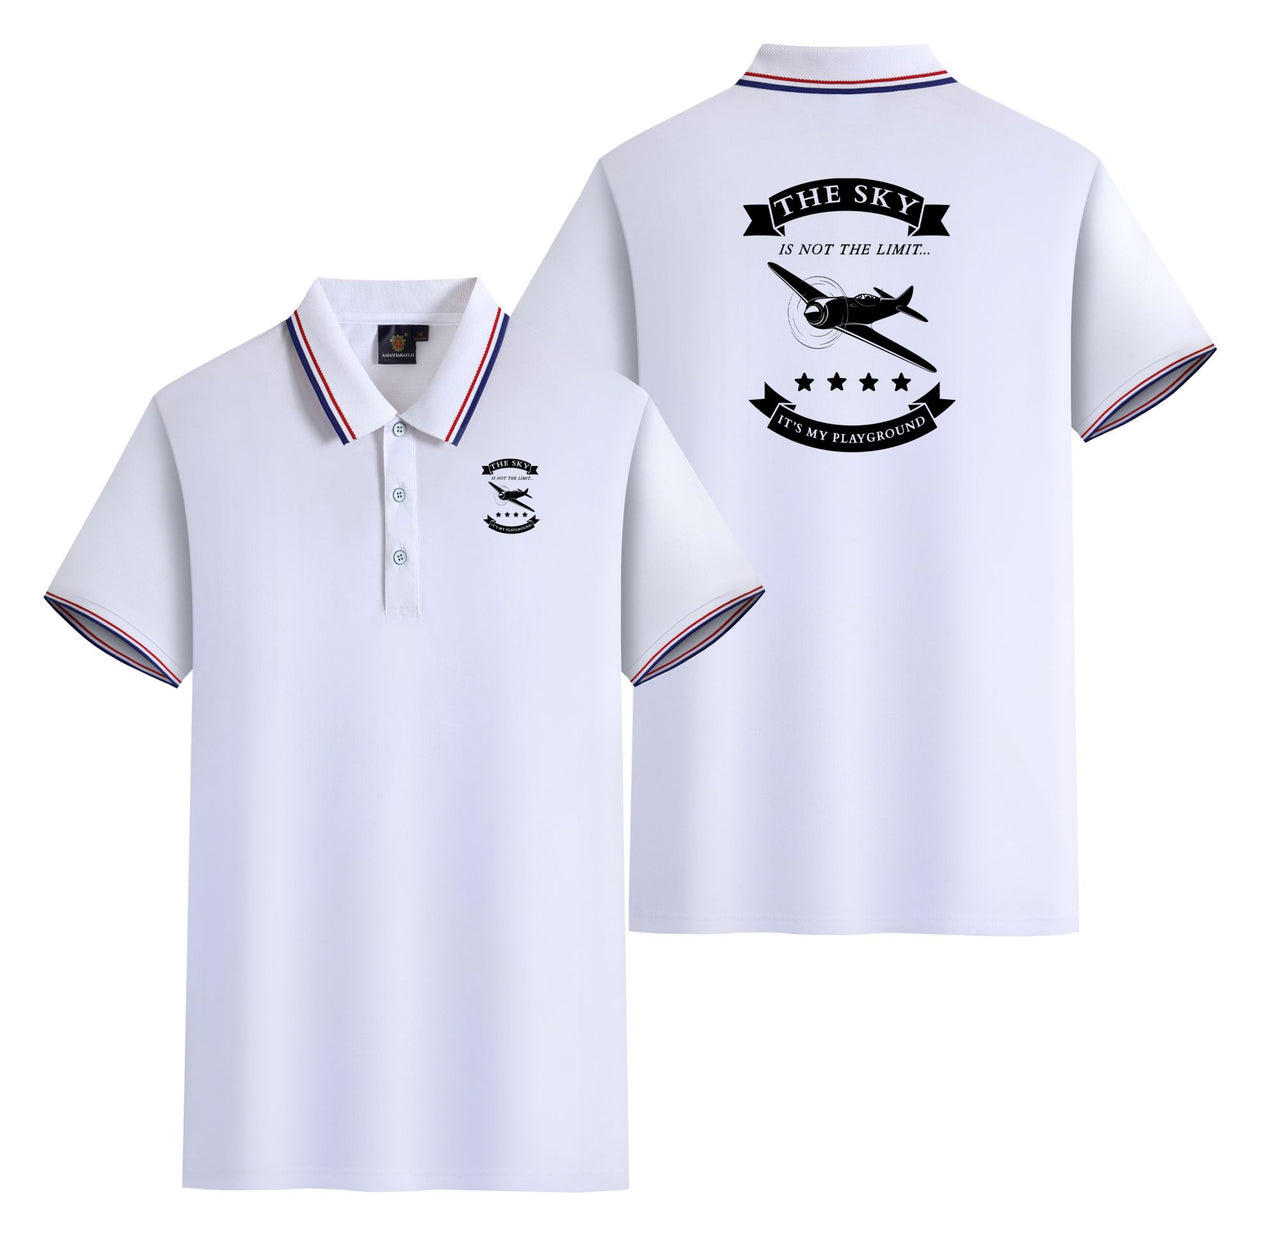 The Sky is not the limit, It's my playground Designed Stylish Polo T-Shirts (Double-Side)